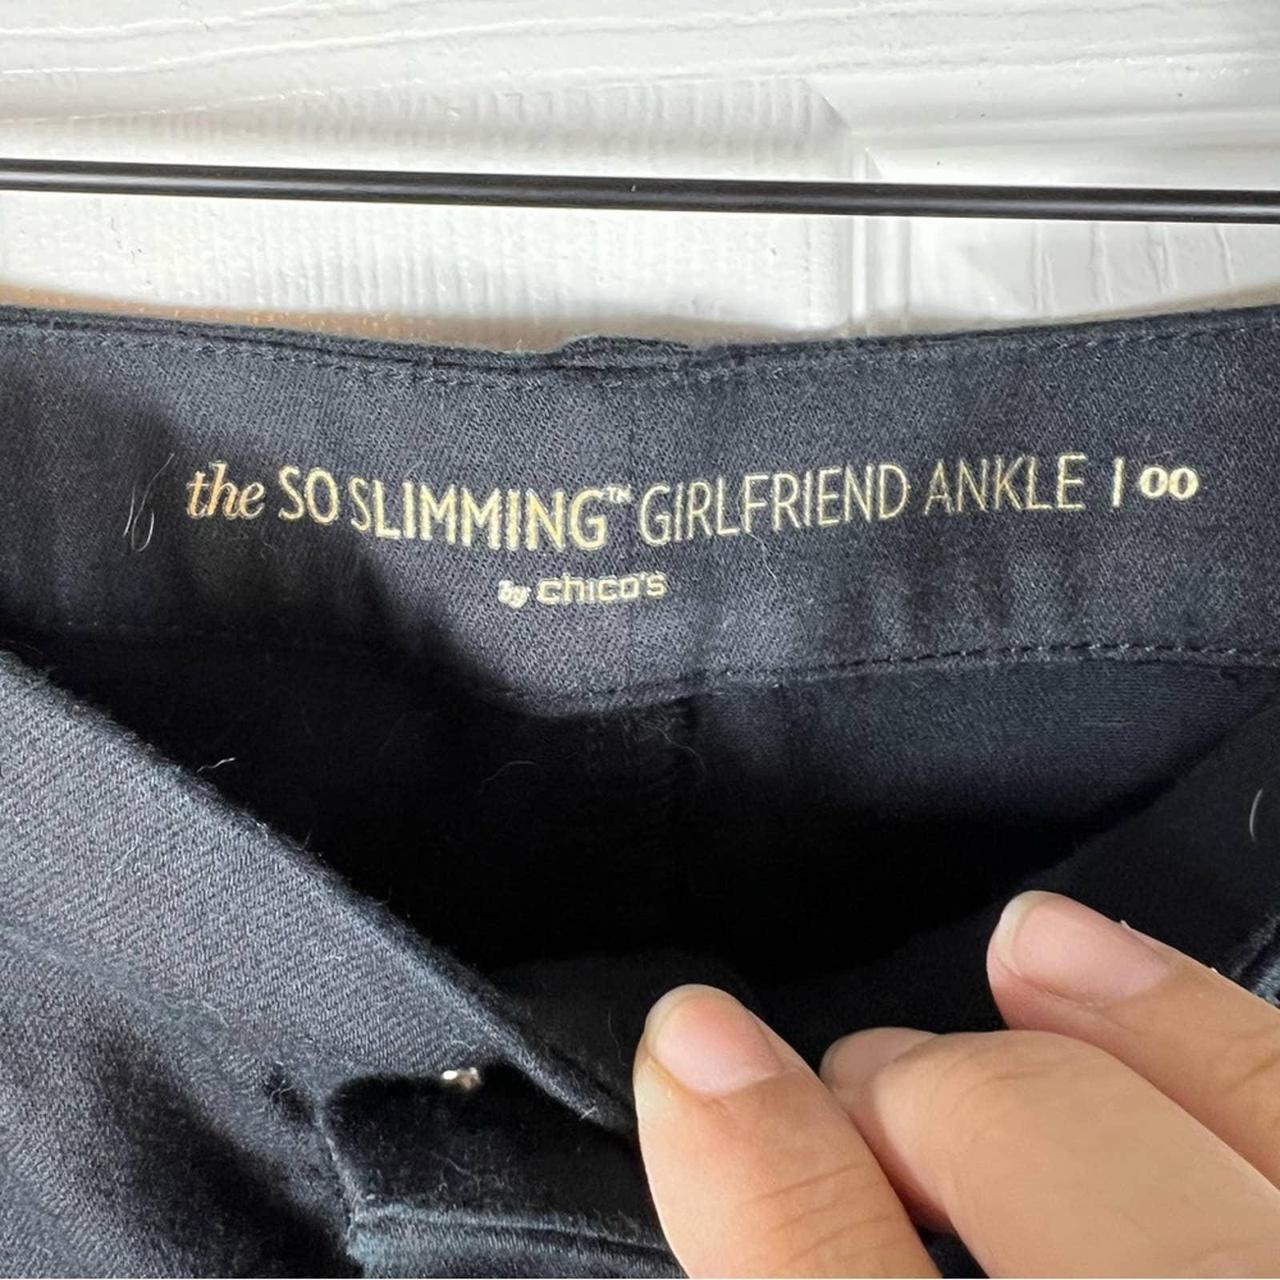 So Slimming Girlfriend Ankle Jeans in Black - Chico's